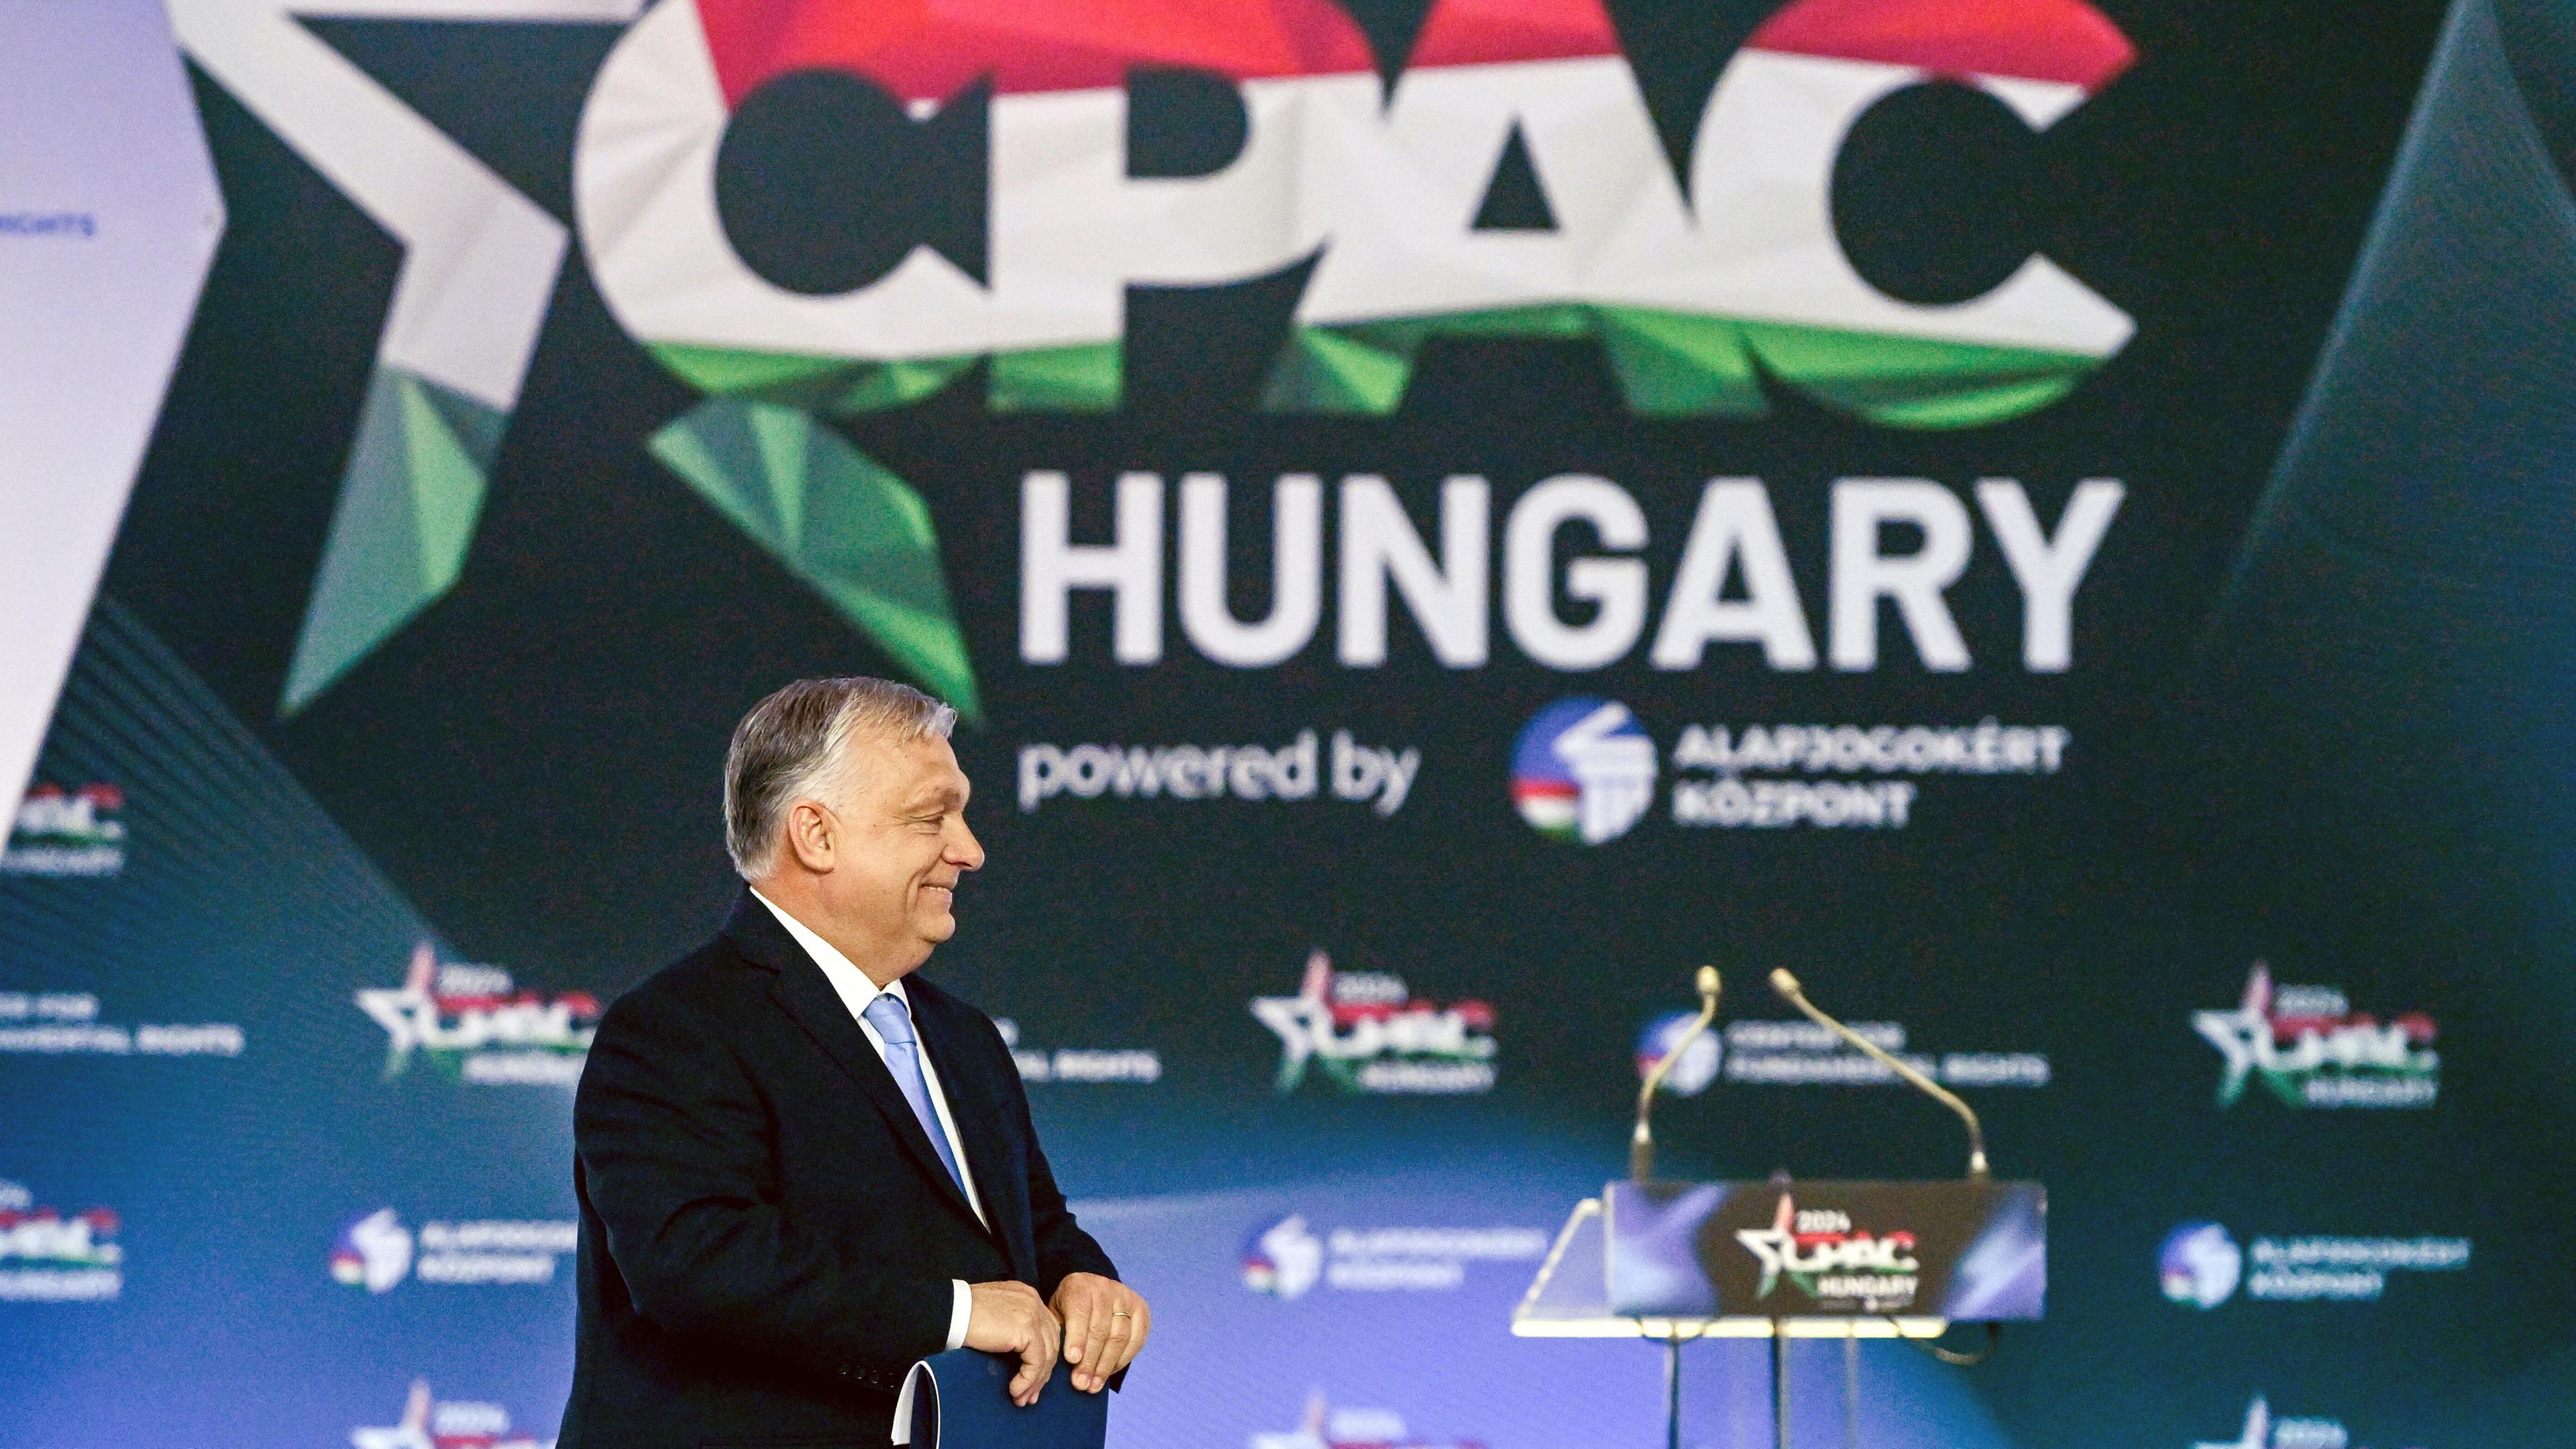 Third edition of the Conservative Political Action Conference in Budapest